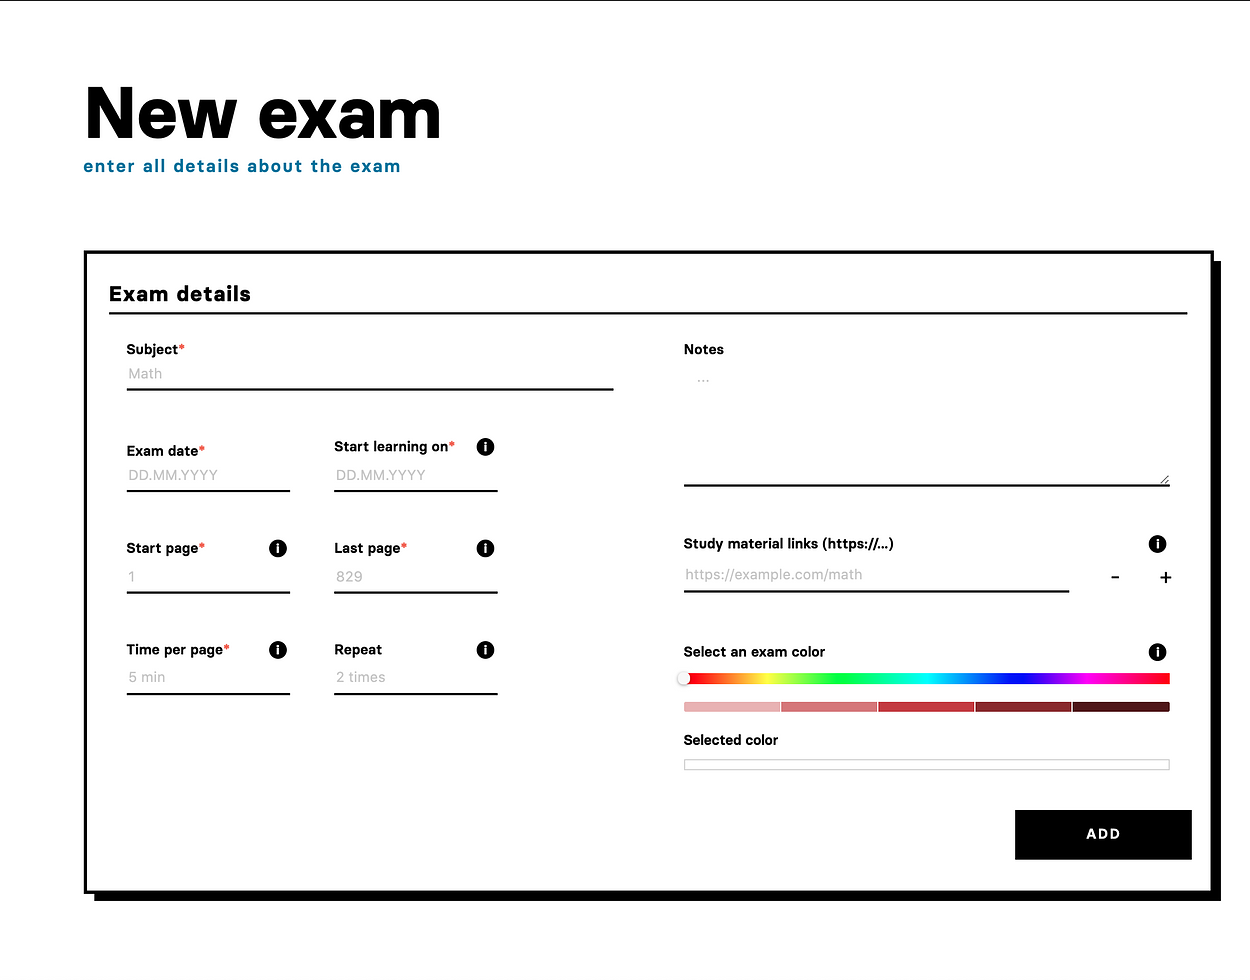 Add a new exam to your profile